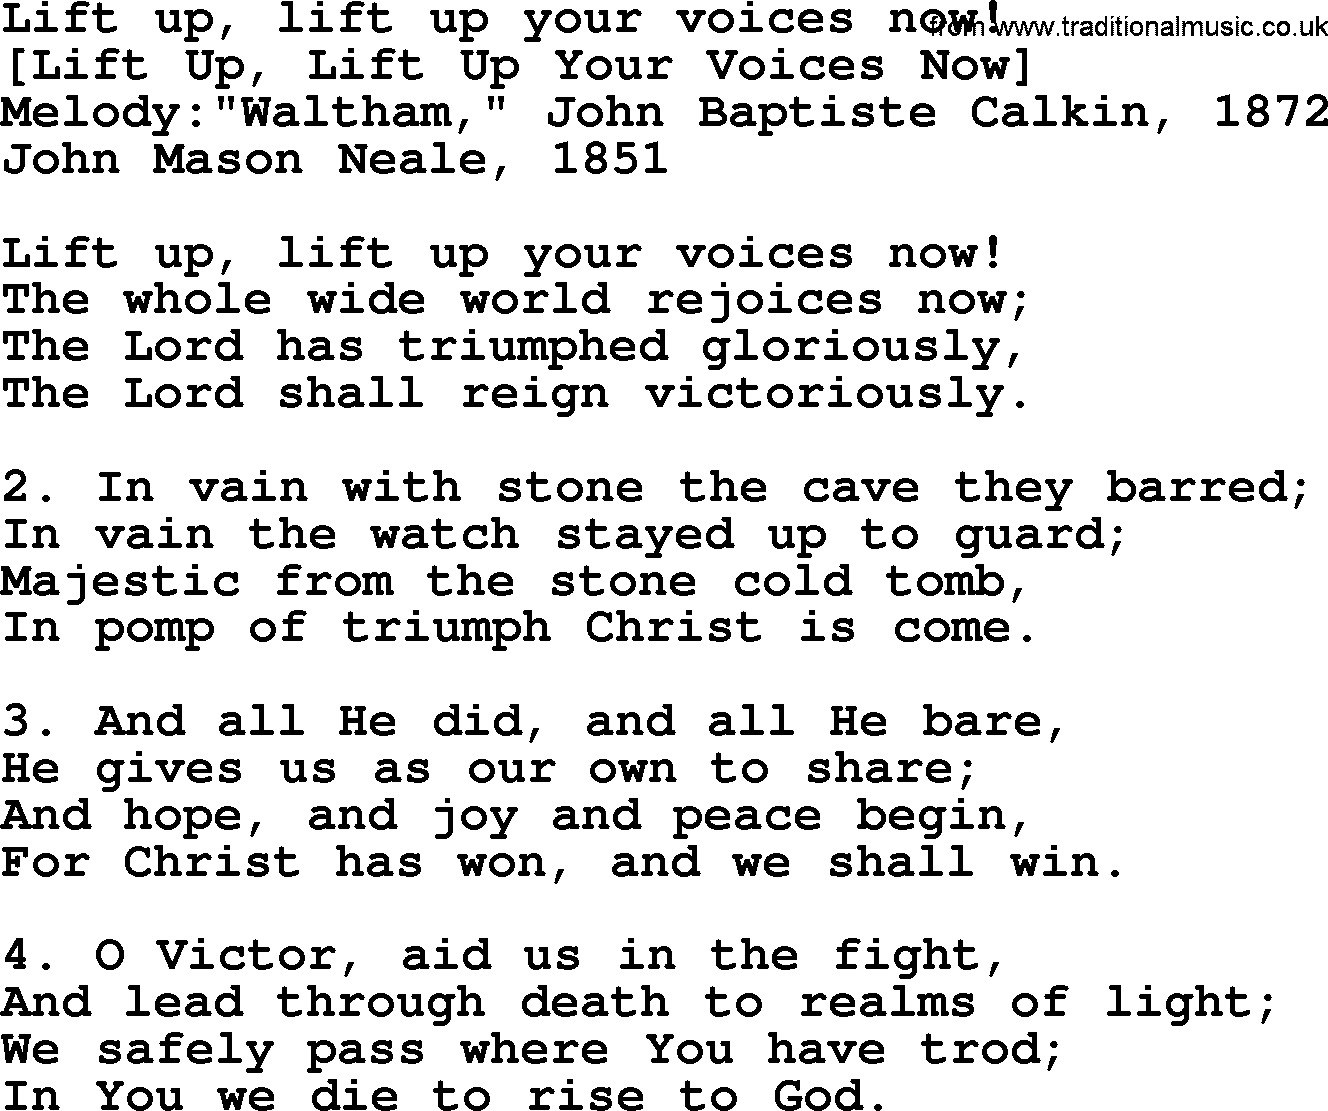 Old English Song: Lift Up, Lift Up Your Voices Now! lyrics